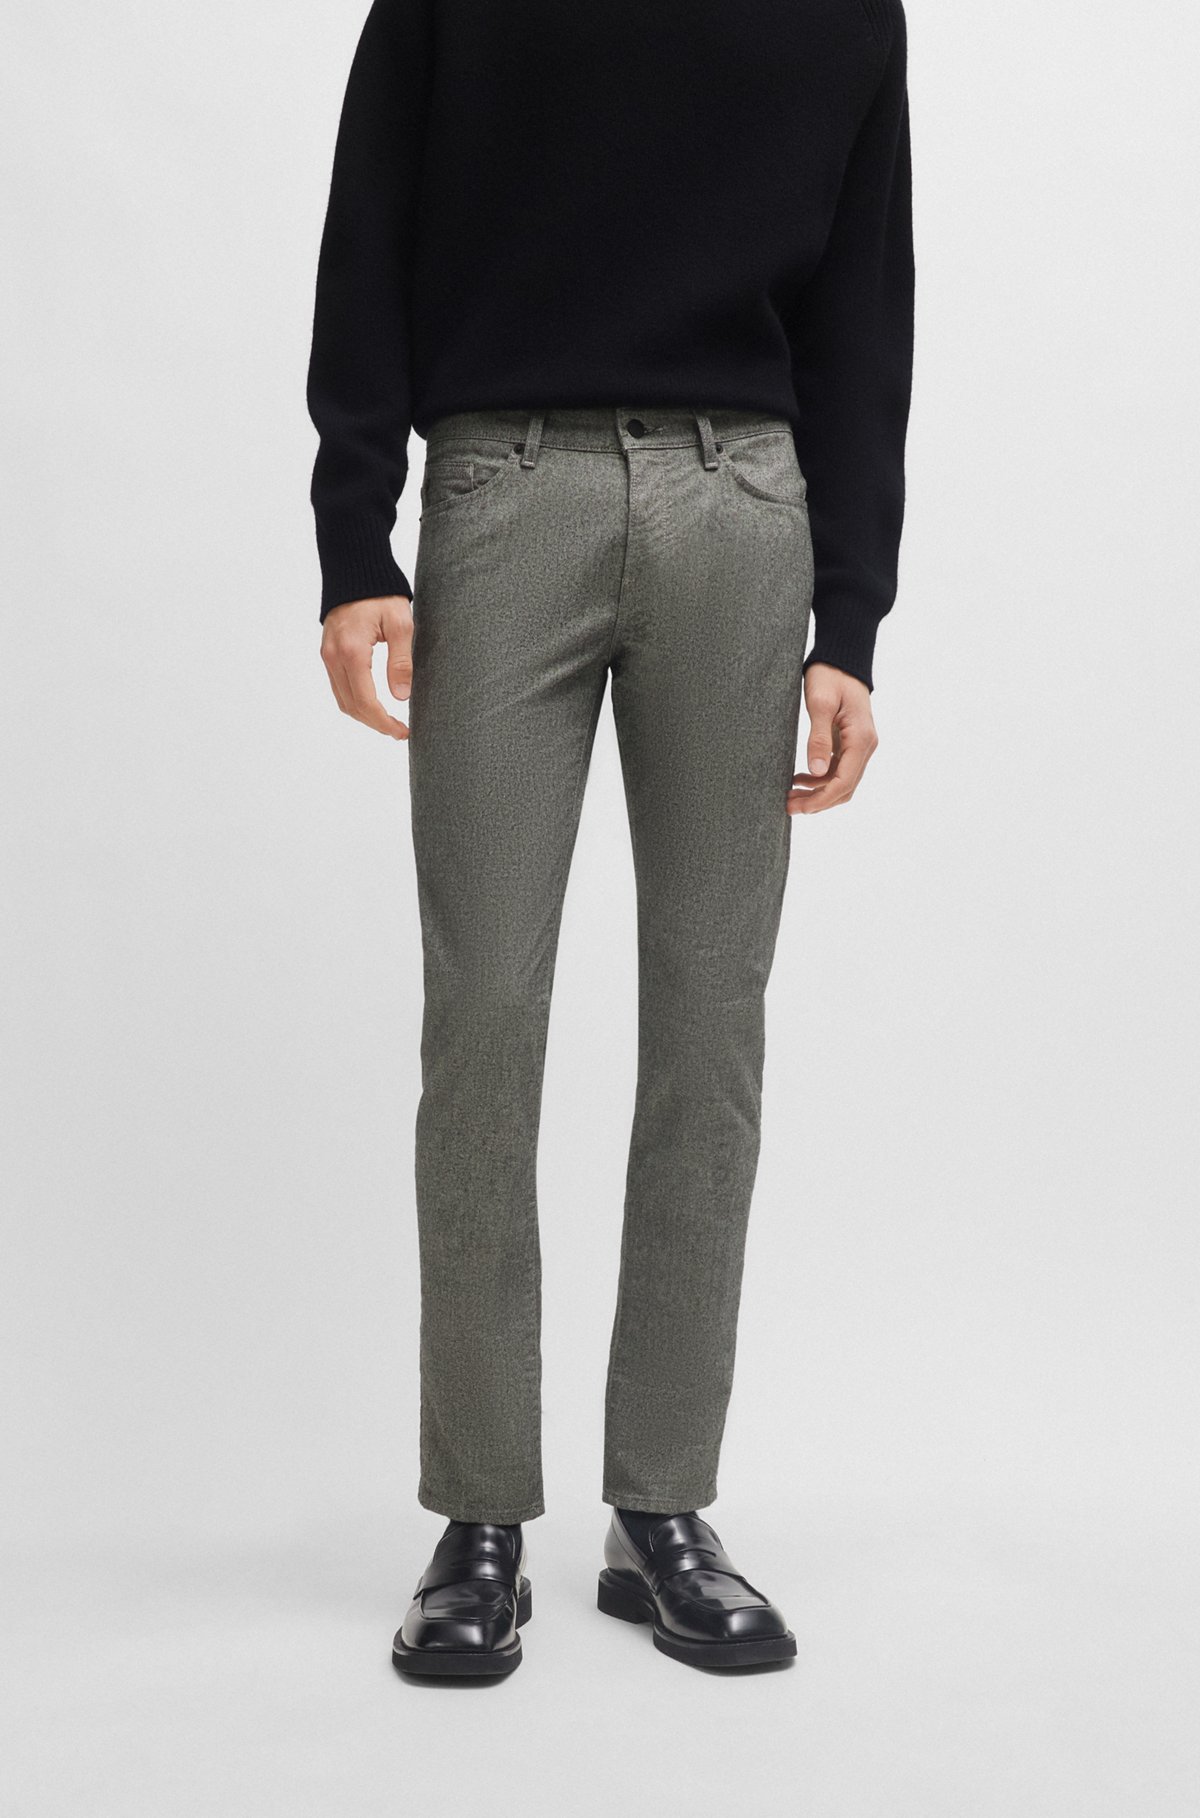 BOSS - Slim-fit jeans in two-tone brushed twill